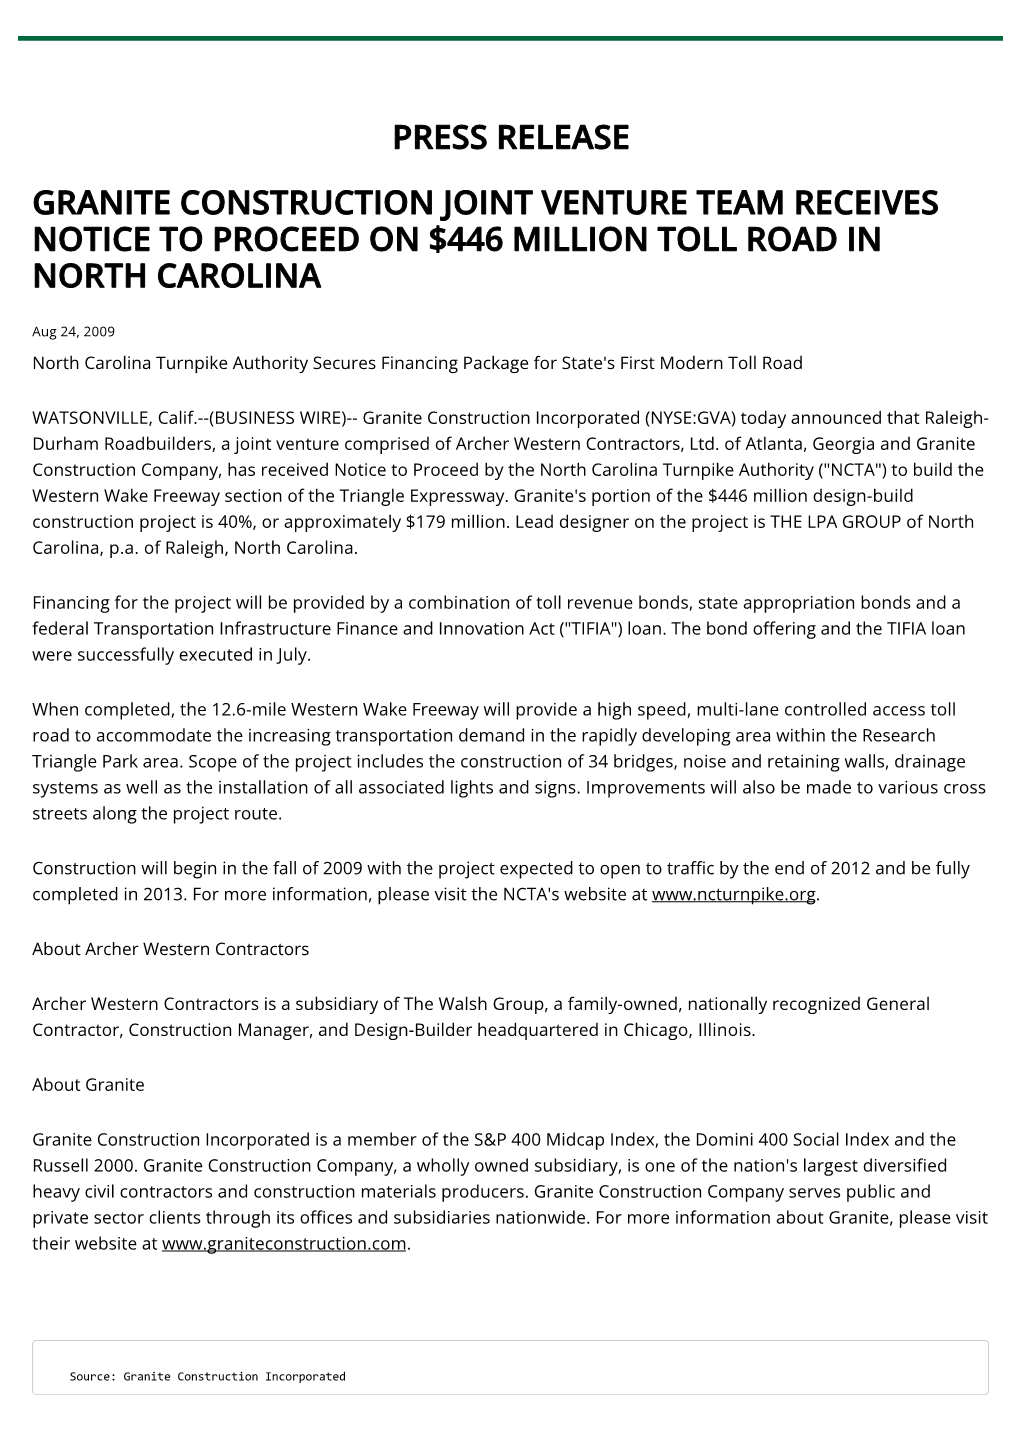 Press Release Granite Construction Joint Venture Team Receives Notice to Proceed on $446 Million Toll Road in North Carolina